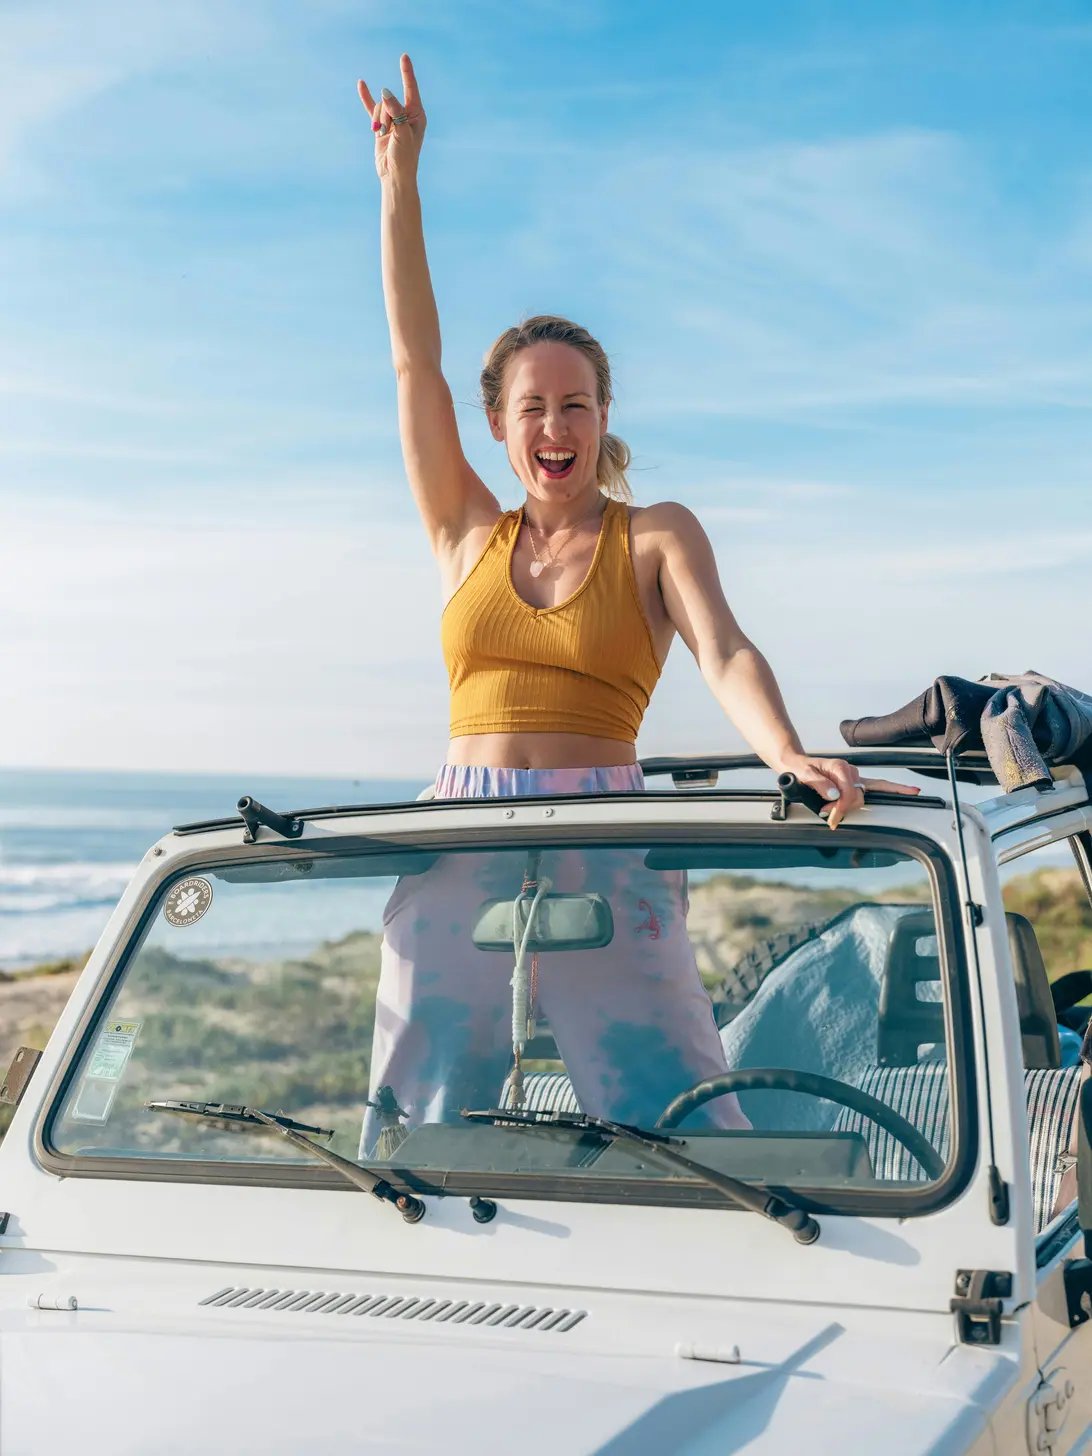 Joyful woman in a yellow tank top standing through the sunroof of a white car, raising her hand in a peace sign, with a beach in the background.